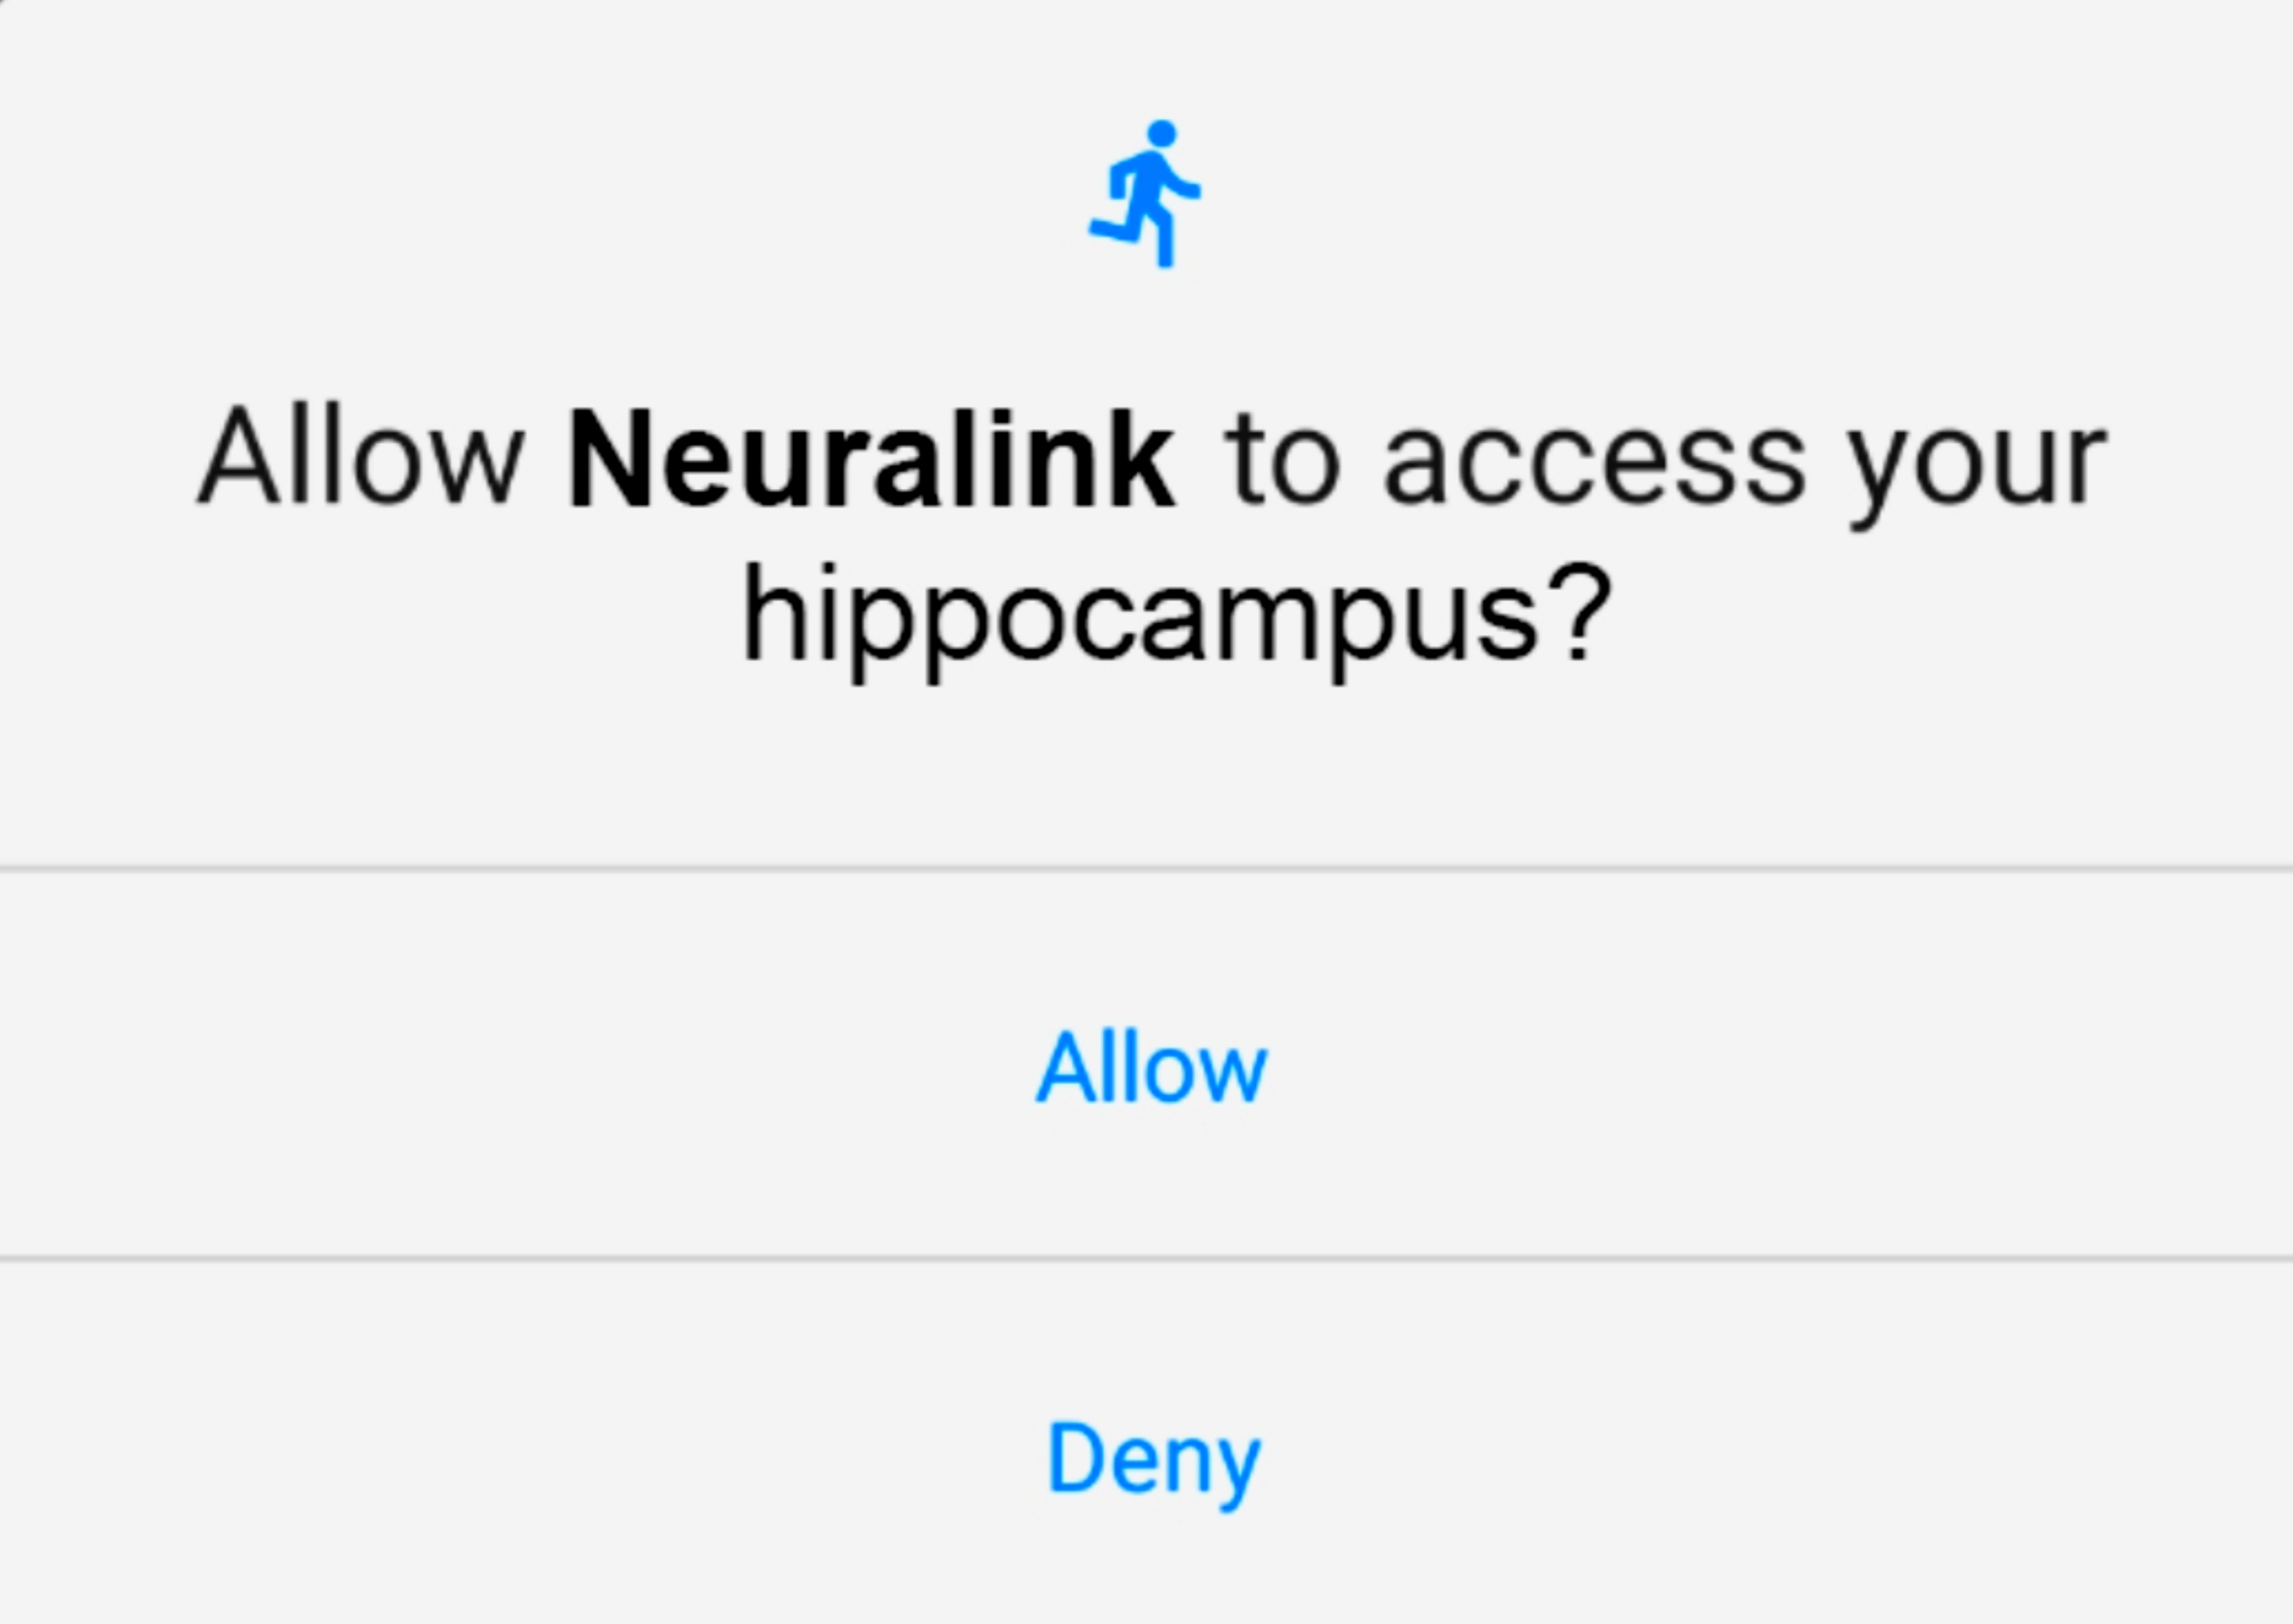 A possible notification asking for permission to access the brain